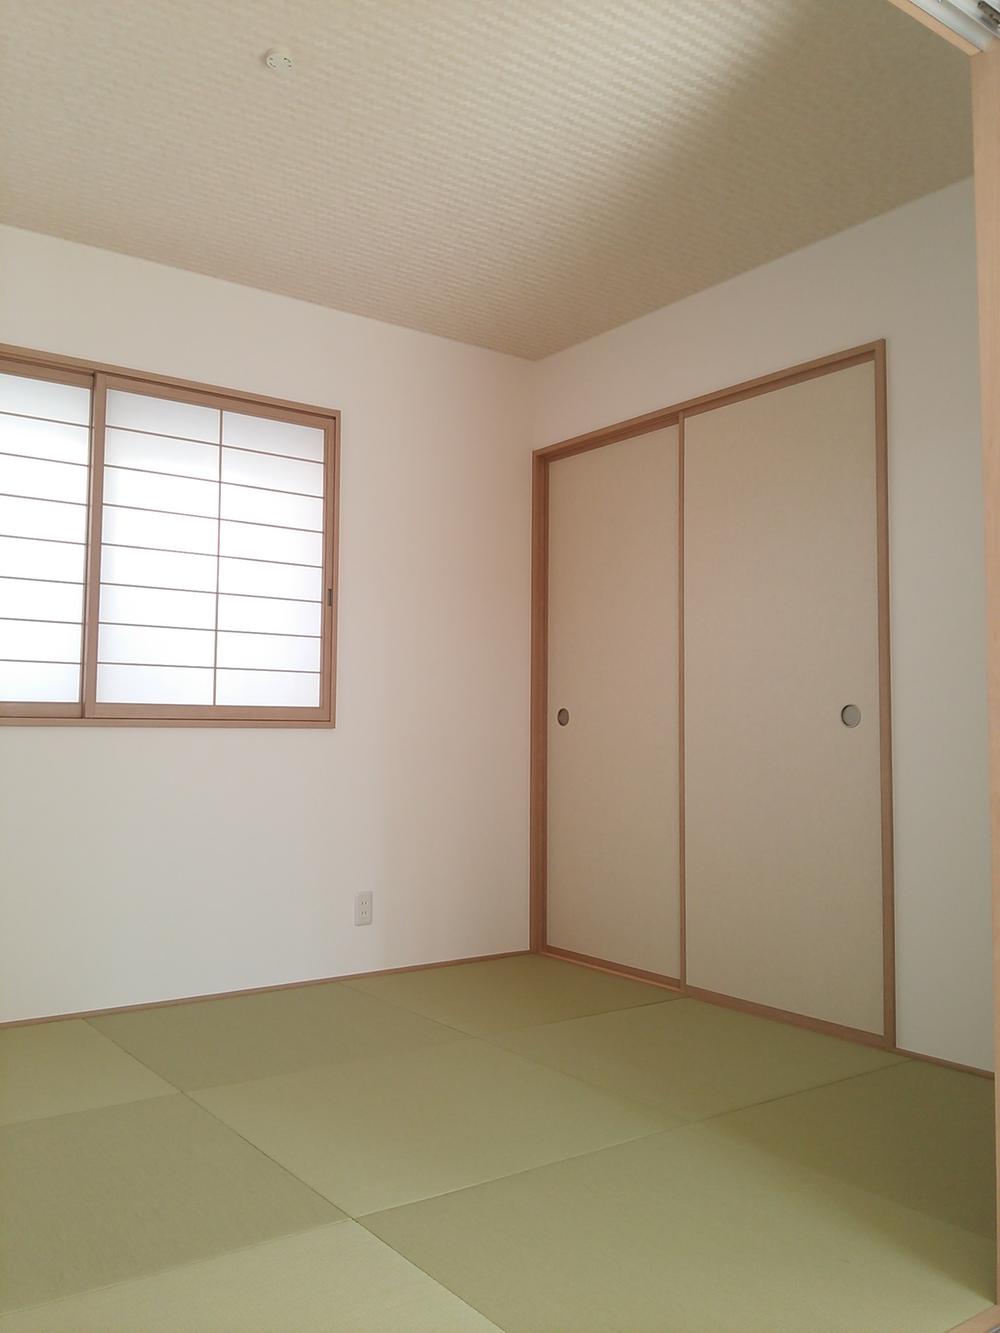 Other introspection. Example of construction Japanese-style room